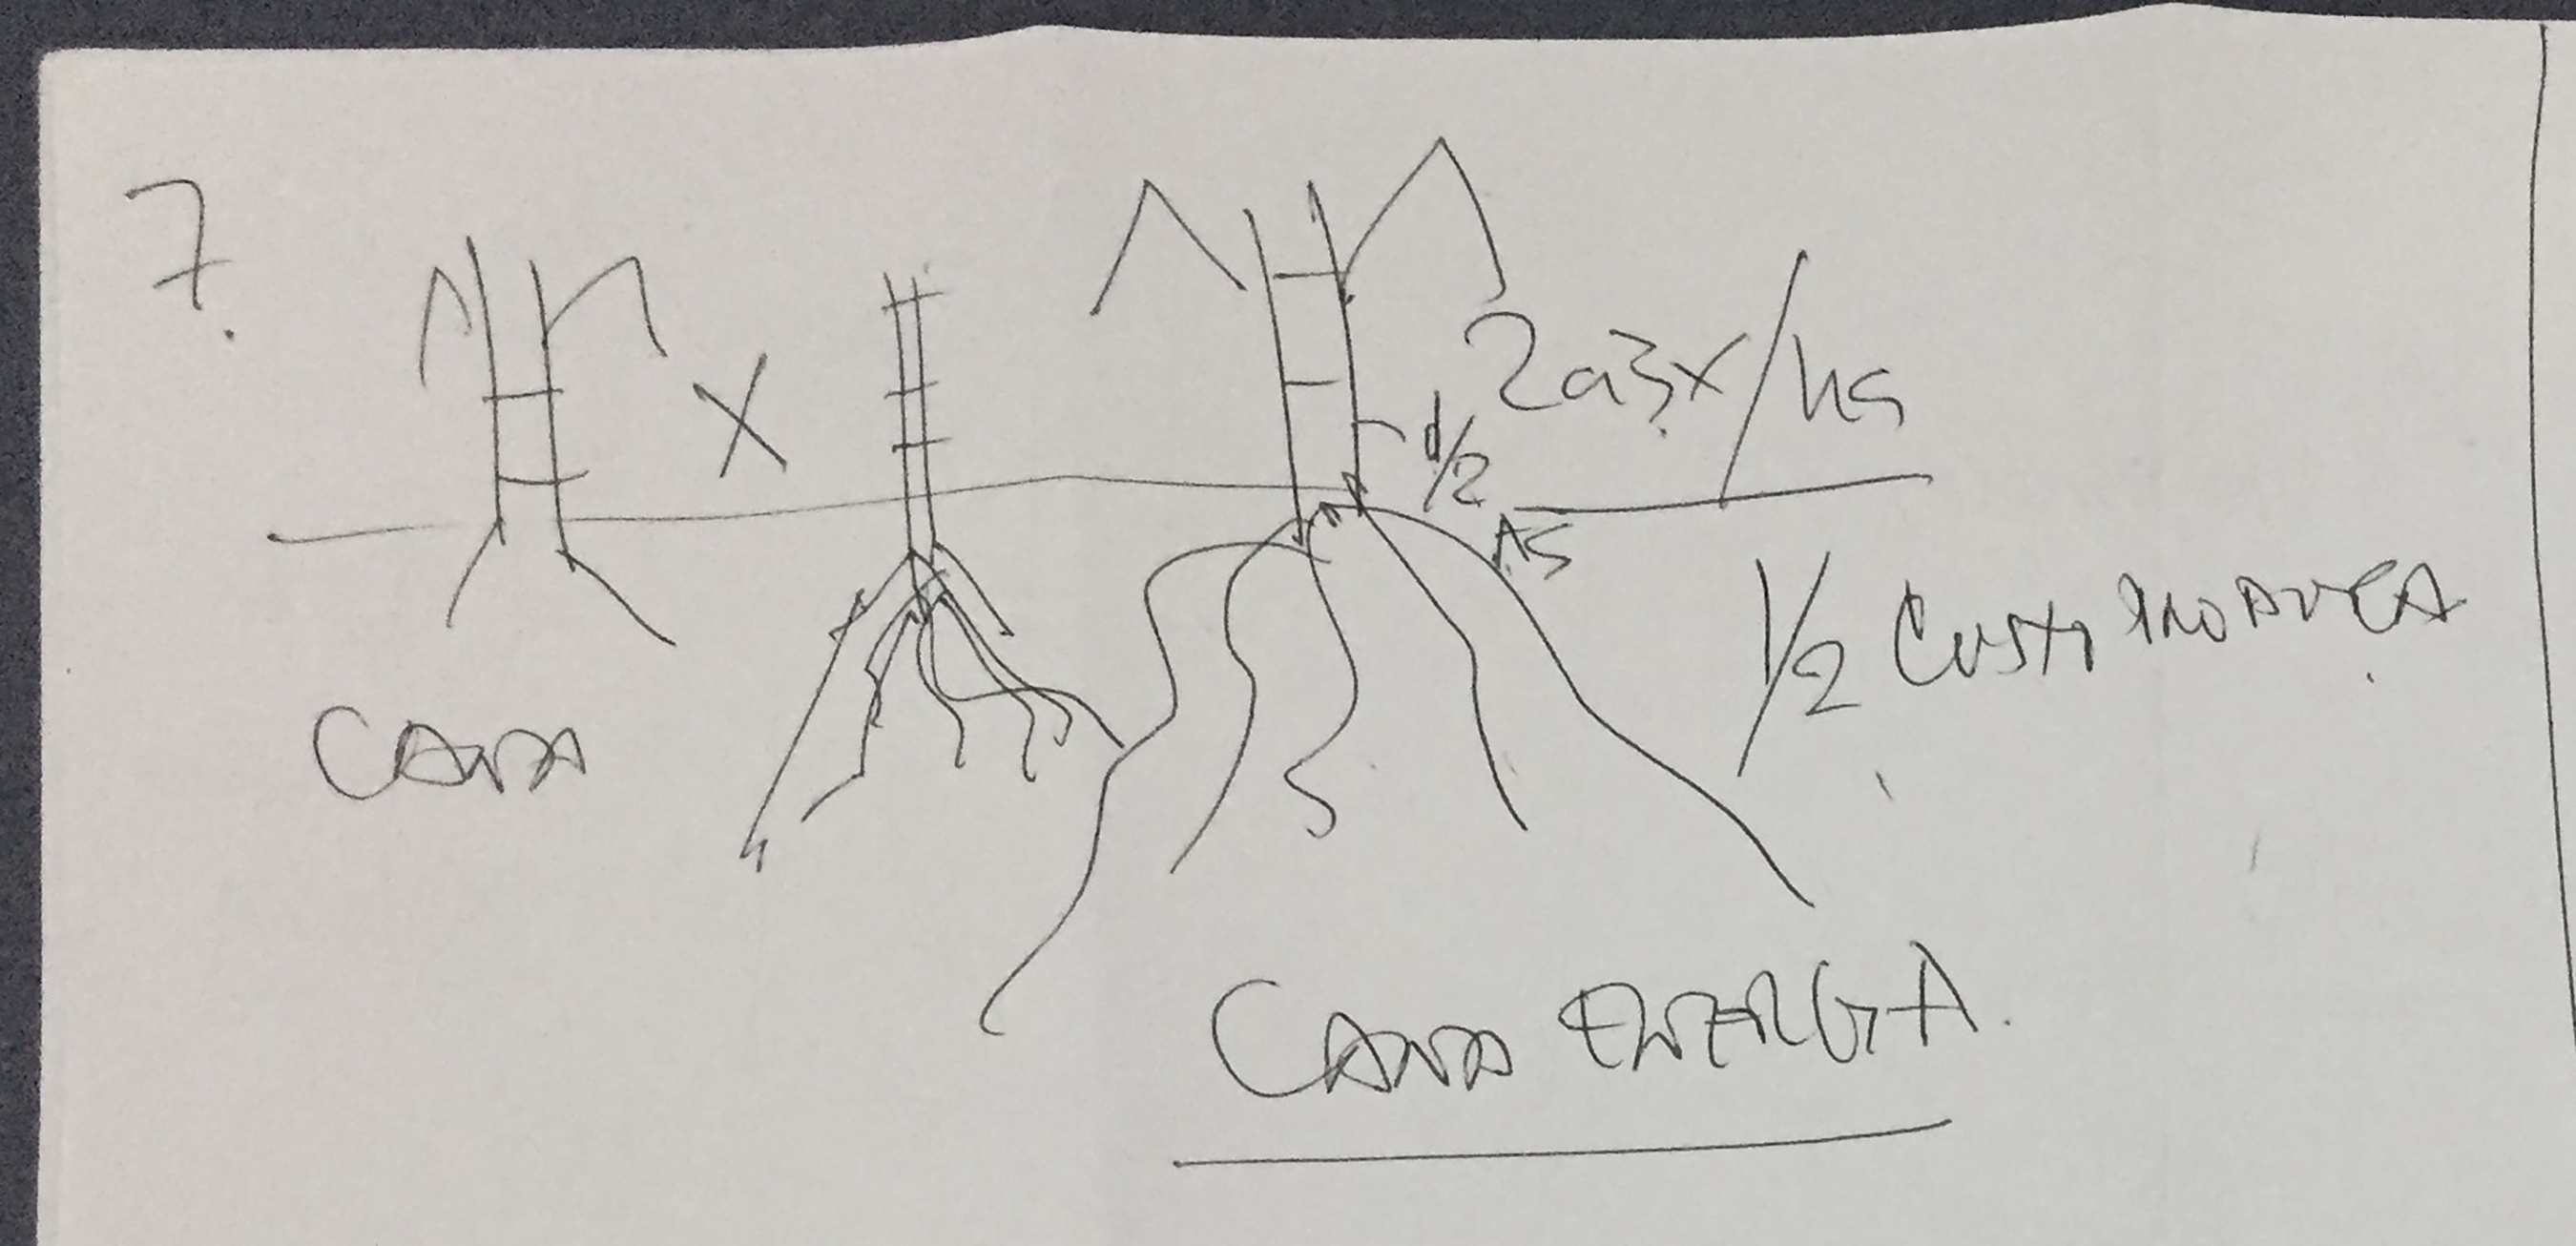 João’s sketch of energy cane, which can grow “two to three times more per hectare” than standard cane. Photo by Katie Ulrich.